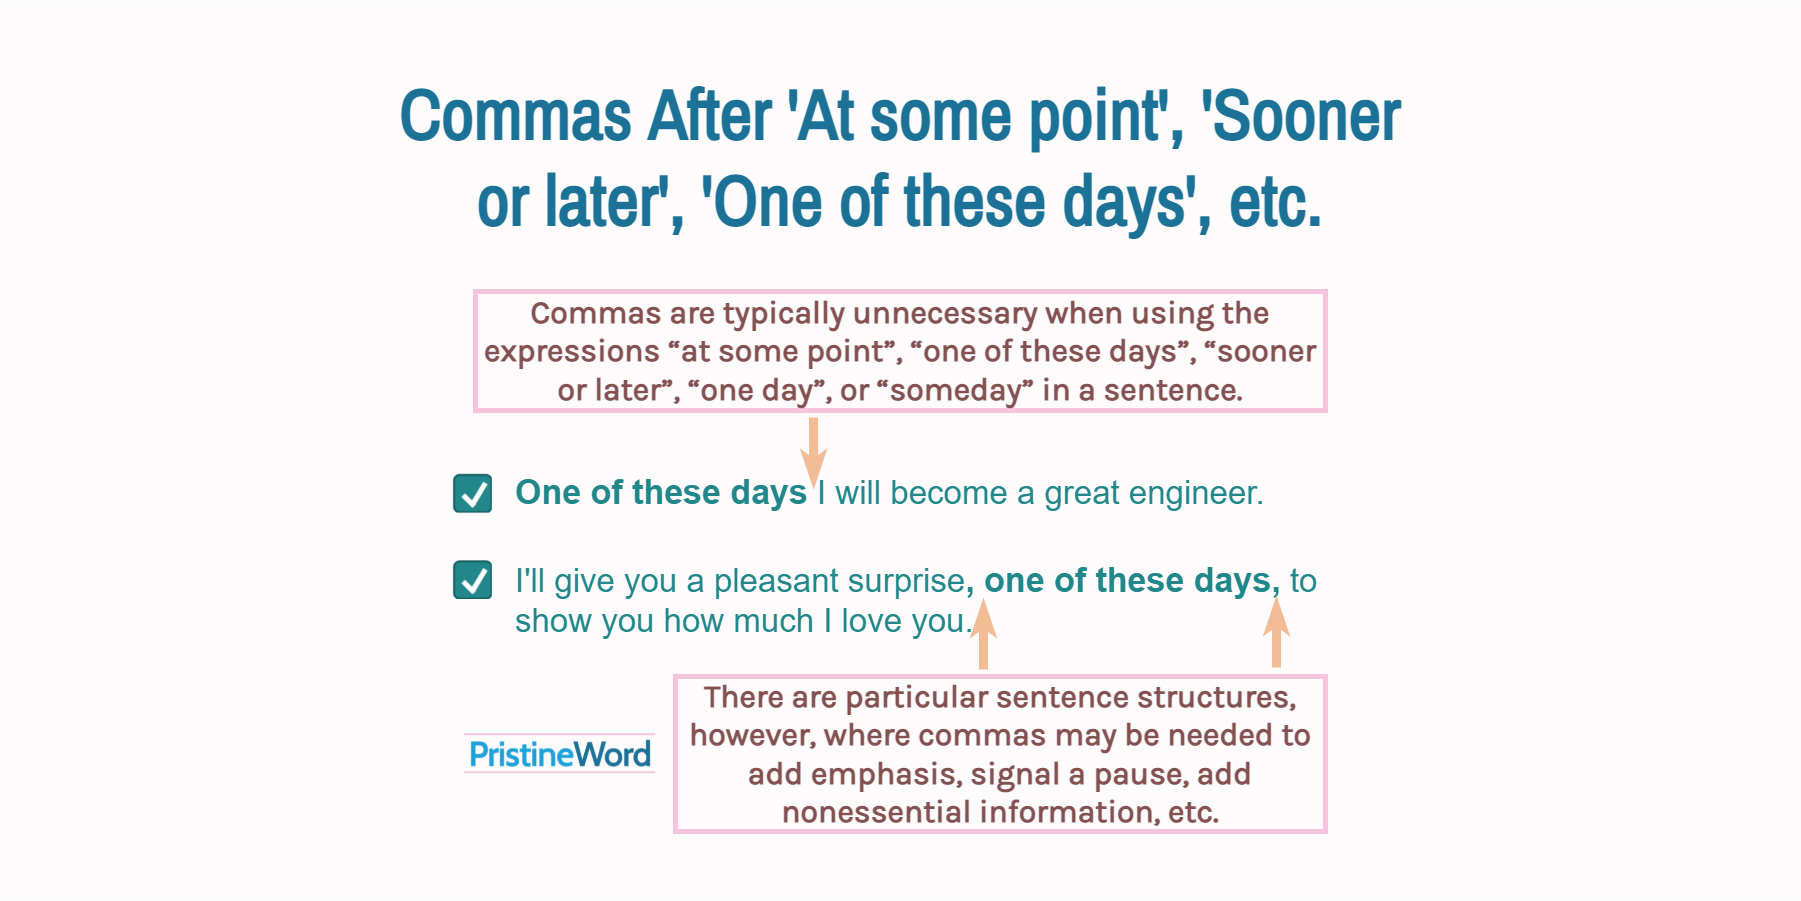 Commas With 'At some point', 'Sooner or later', 'One of these days', 'One day', or 'Someday'